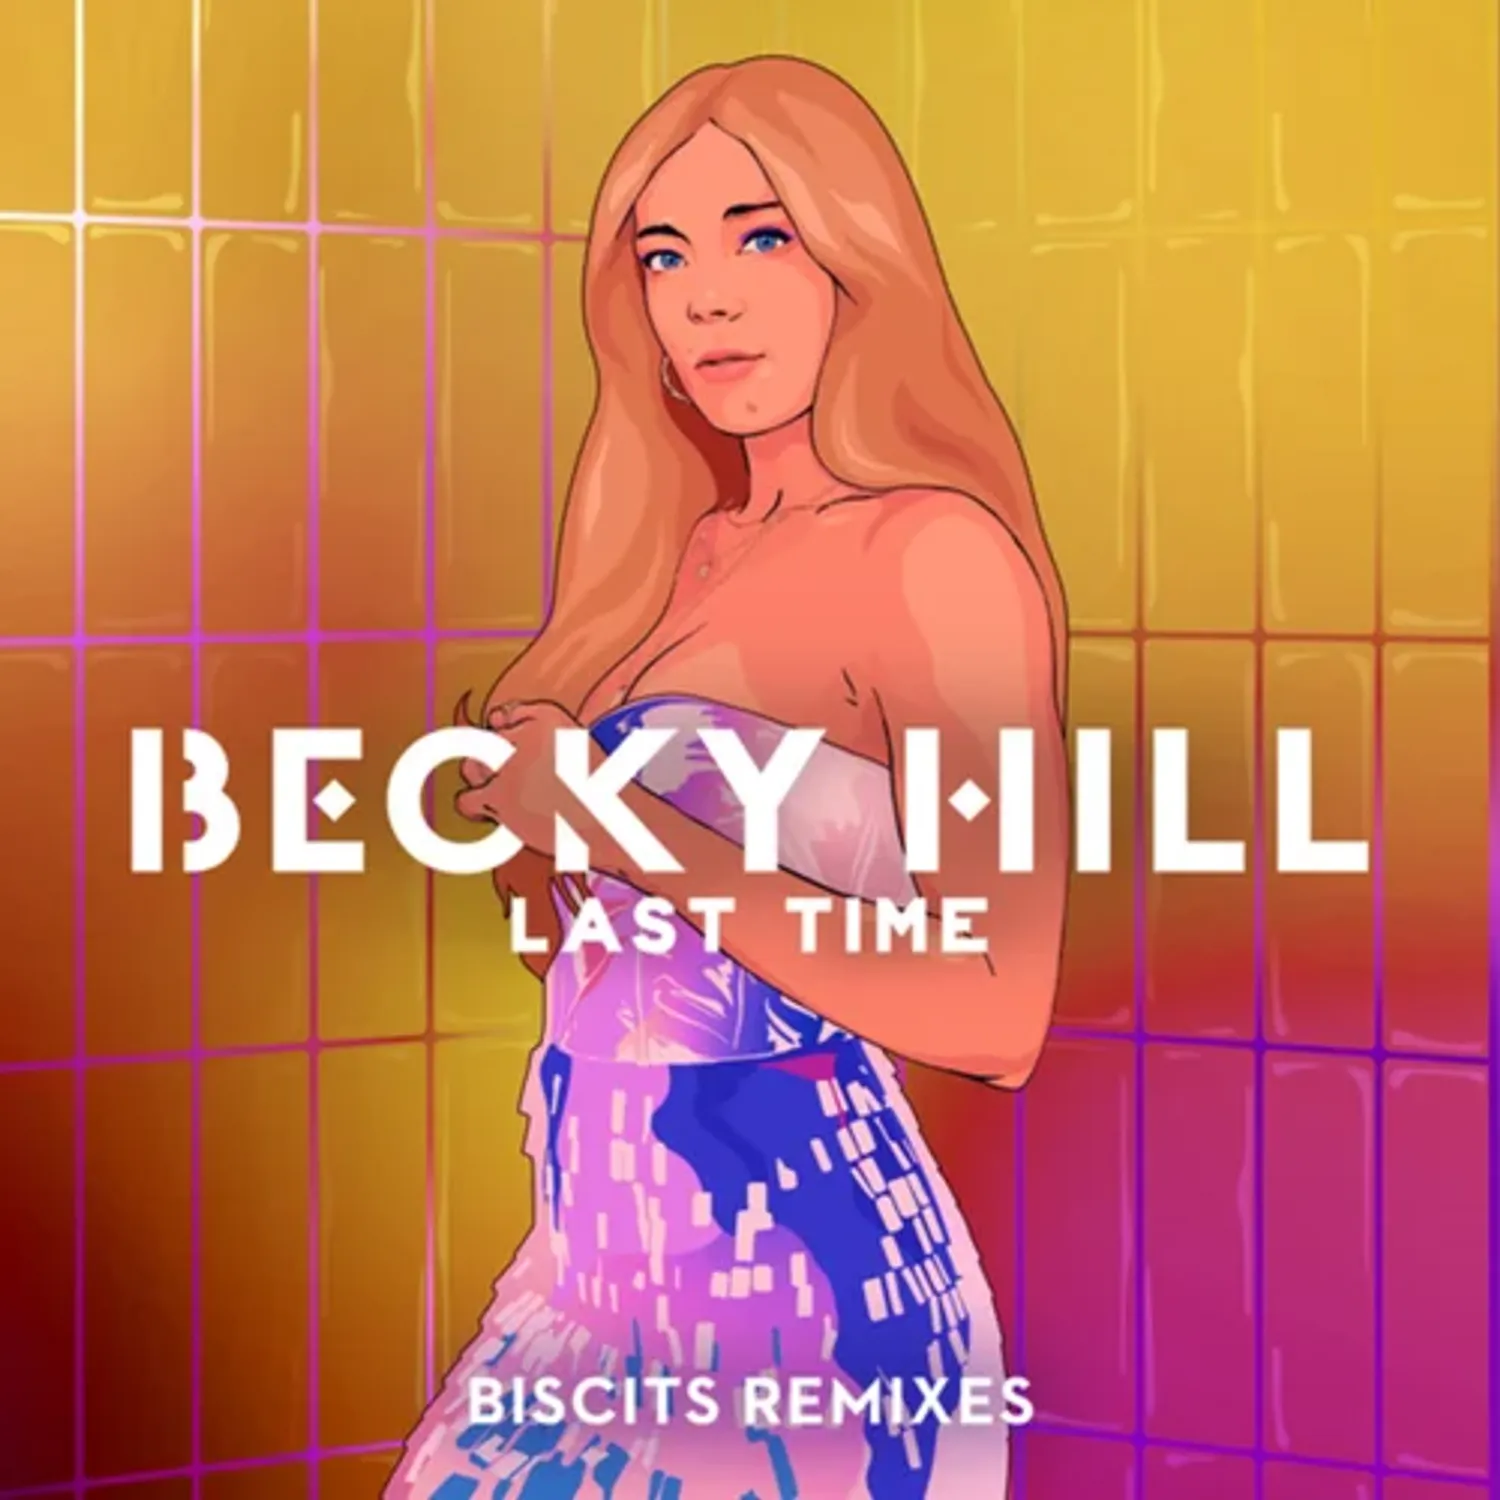 Becky HIll - Last Time (Biscits remix)